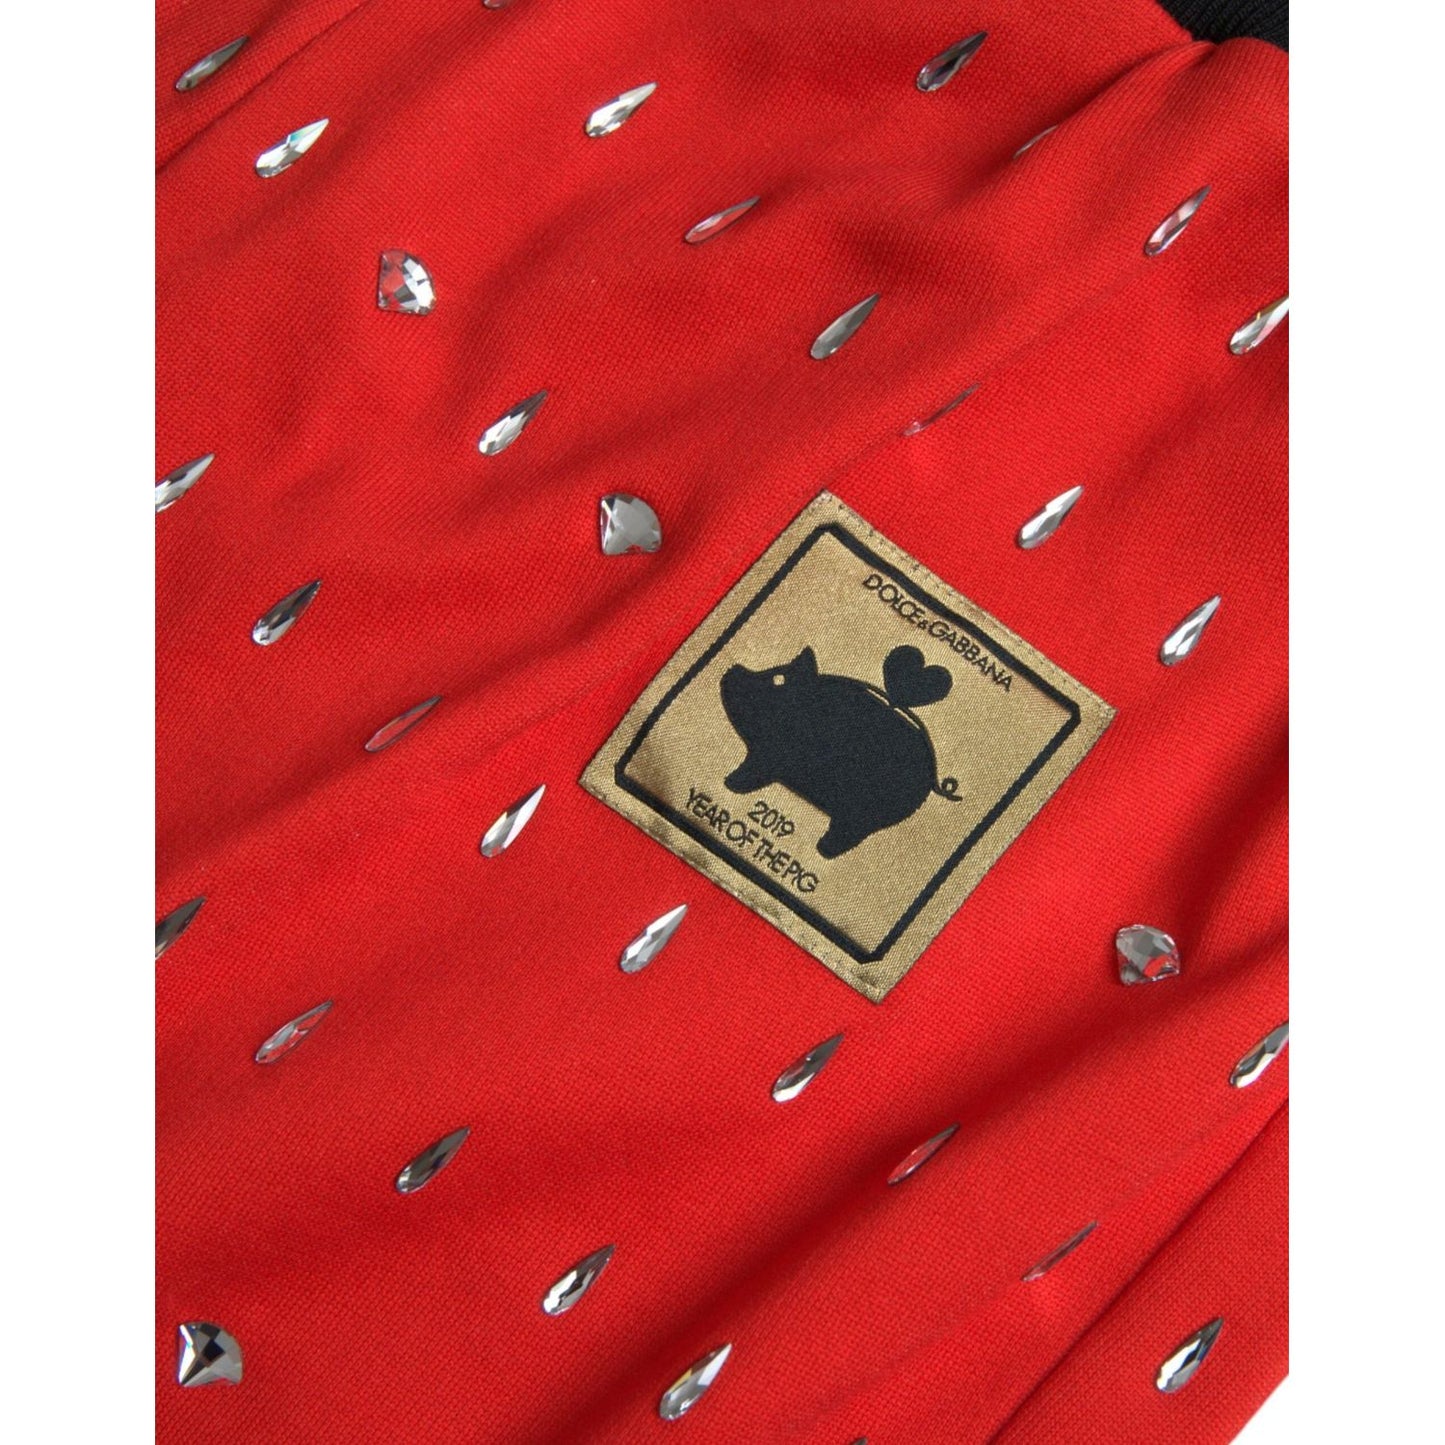 Dolce & Gabbana Red Year Of The Pig Jogger Sweatpants Pants red-year-of-the-pig-jogger-sweatpants-pants